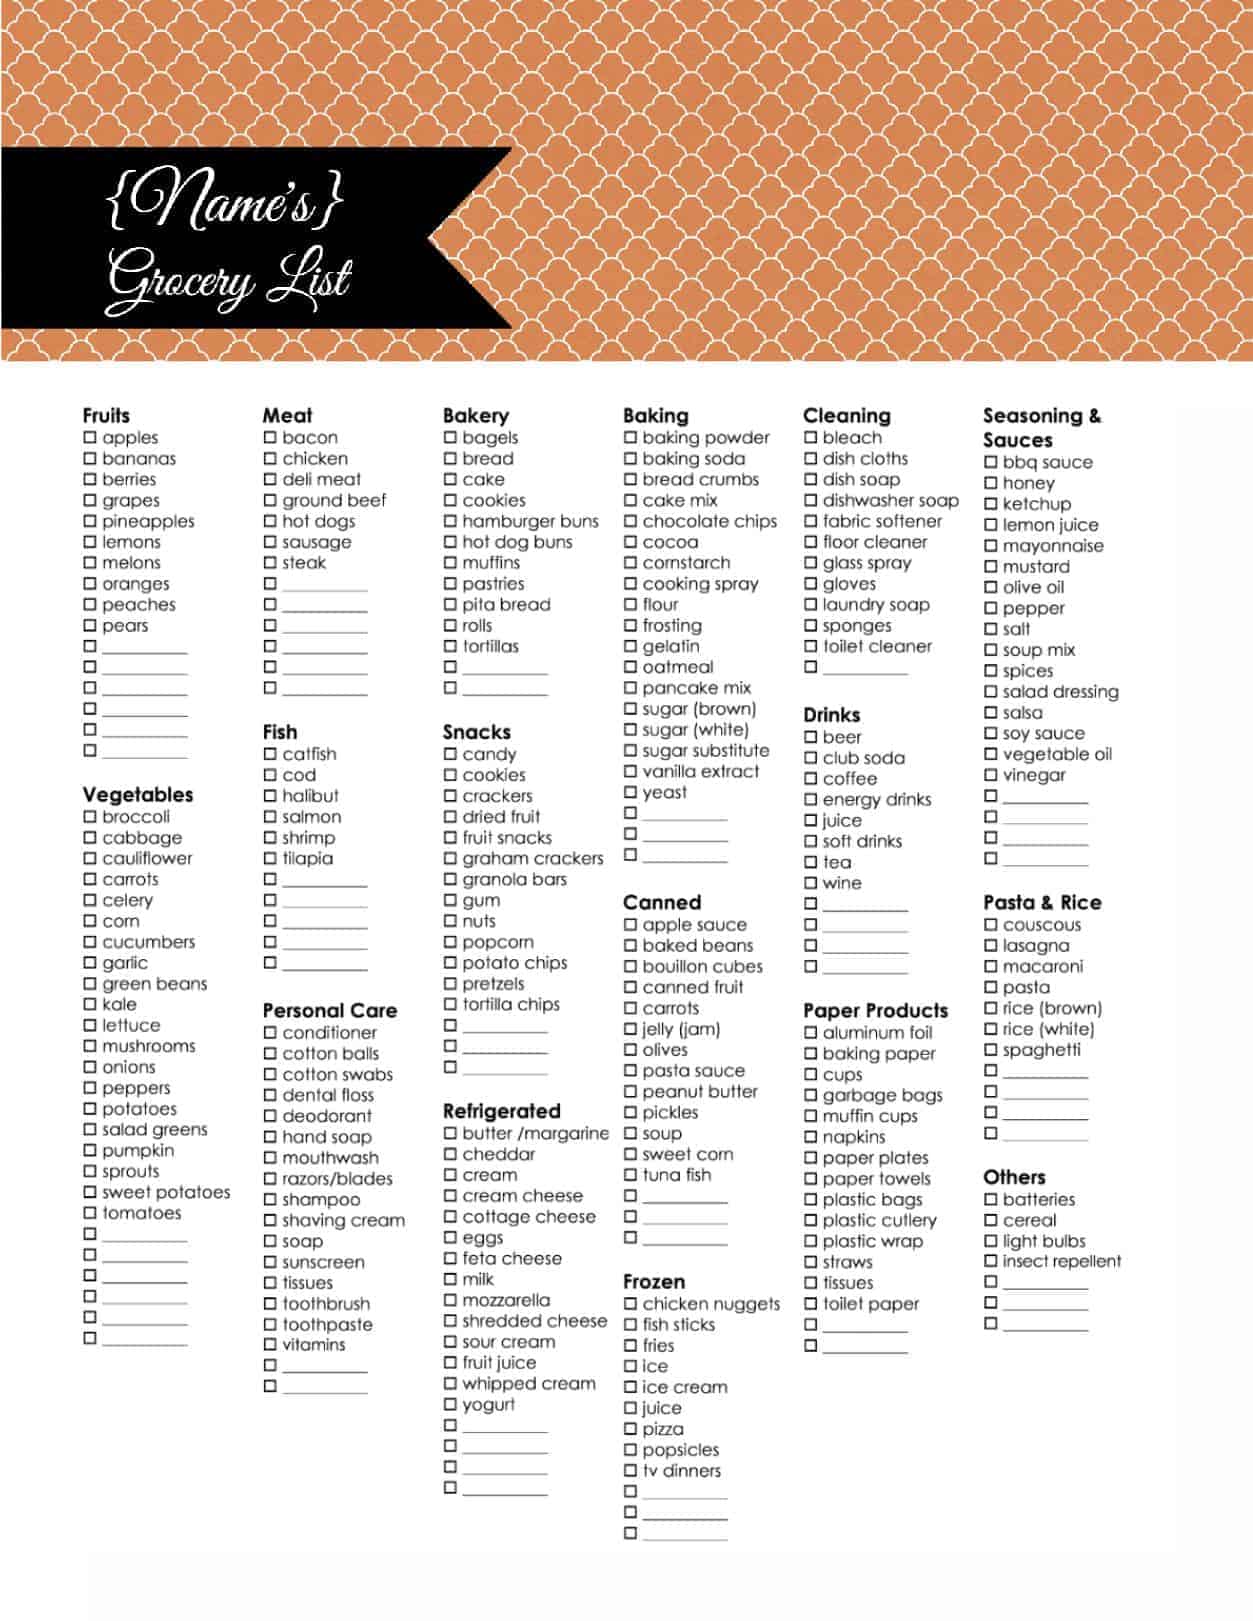 Grocery List Template - 101 Planners